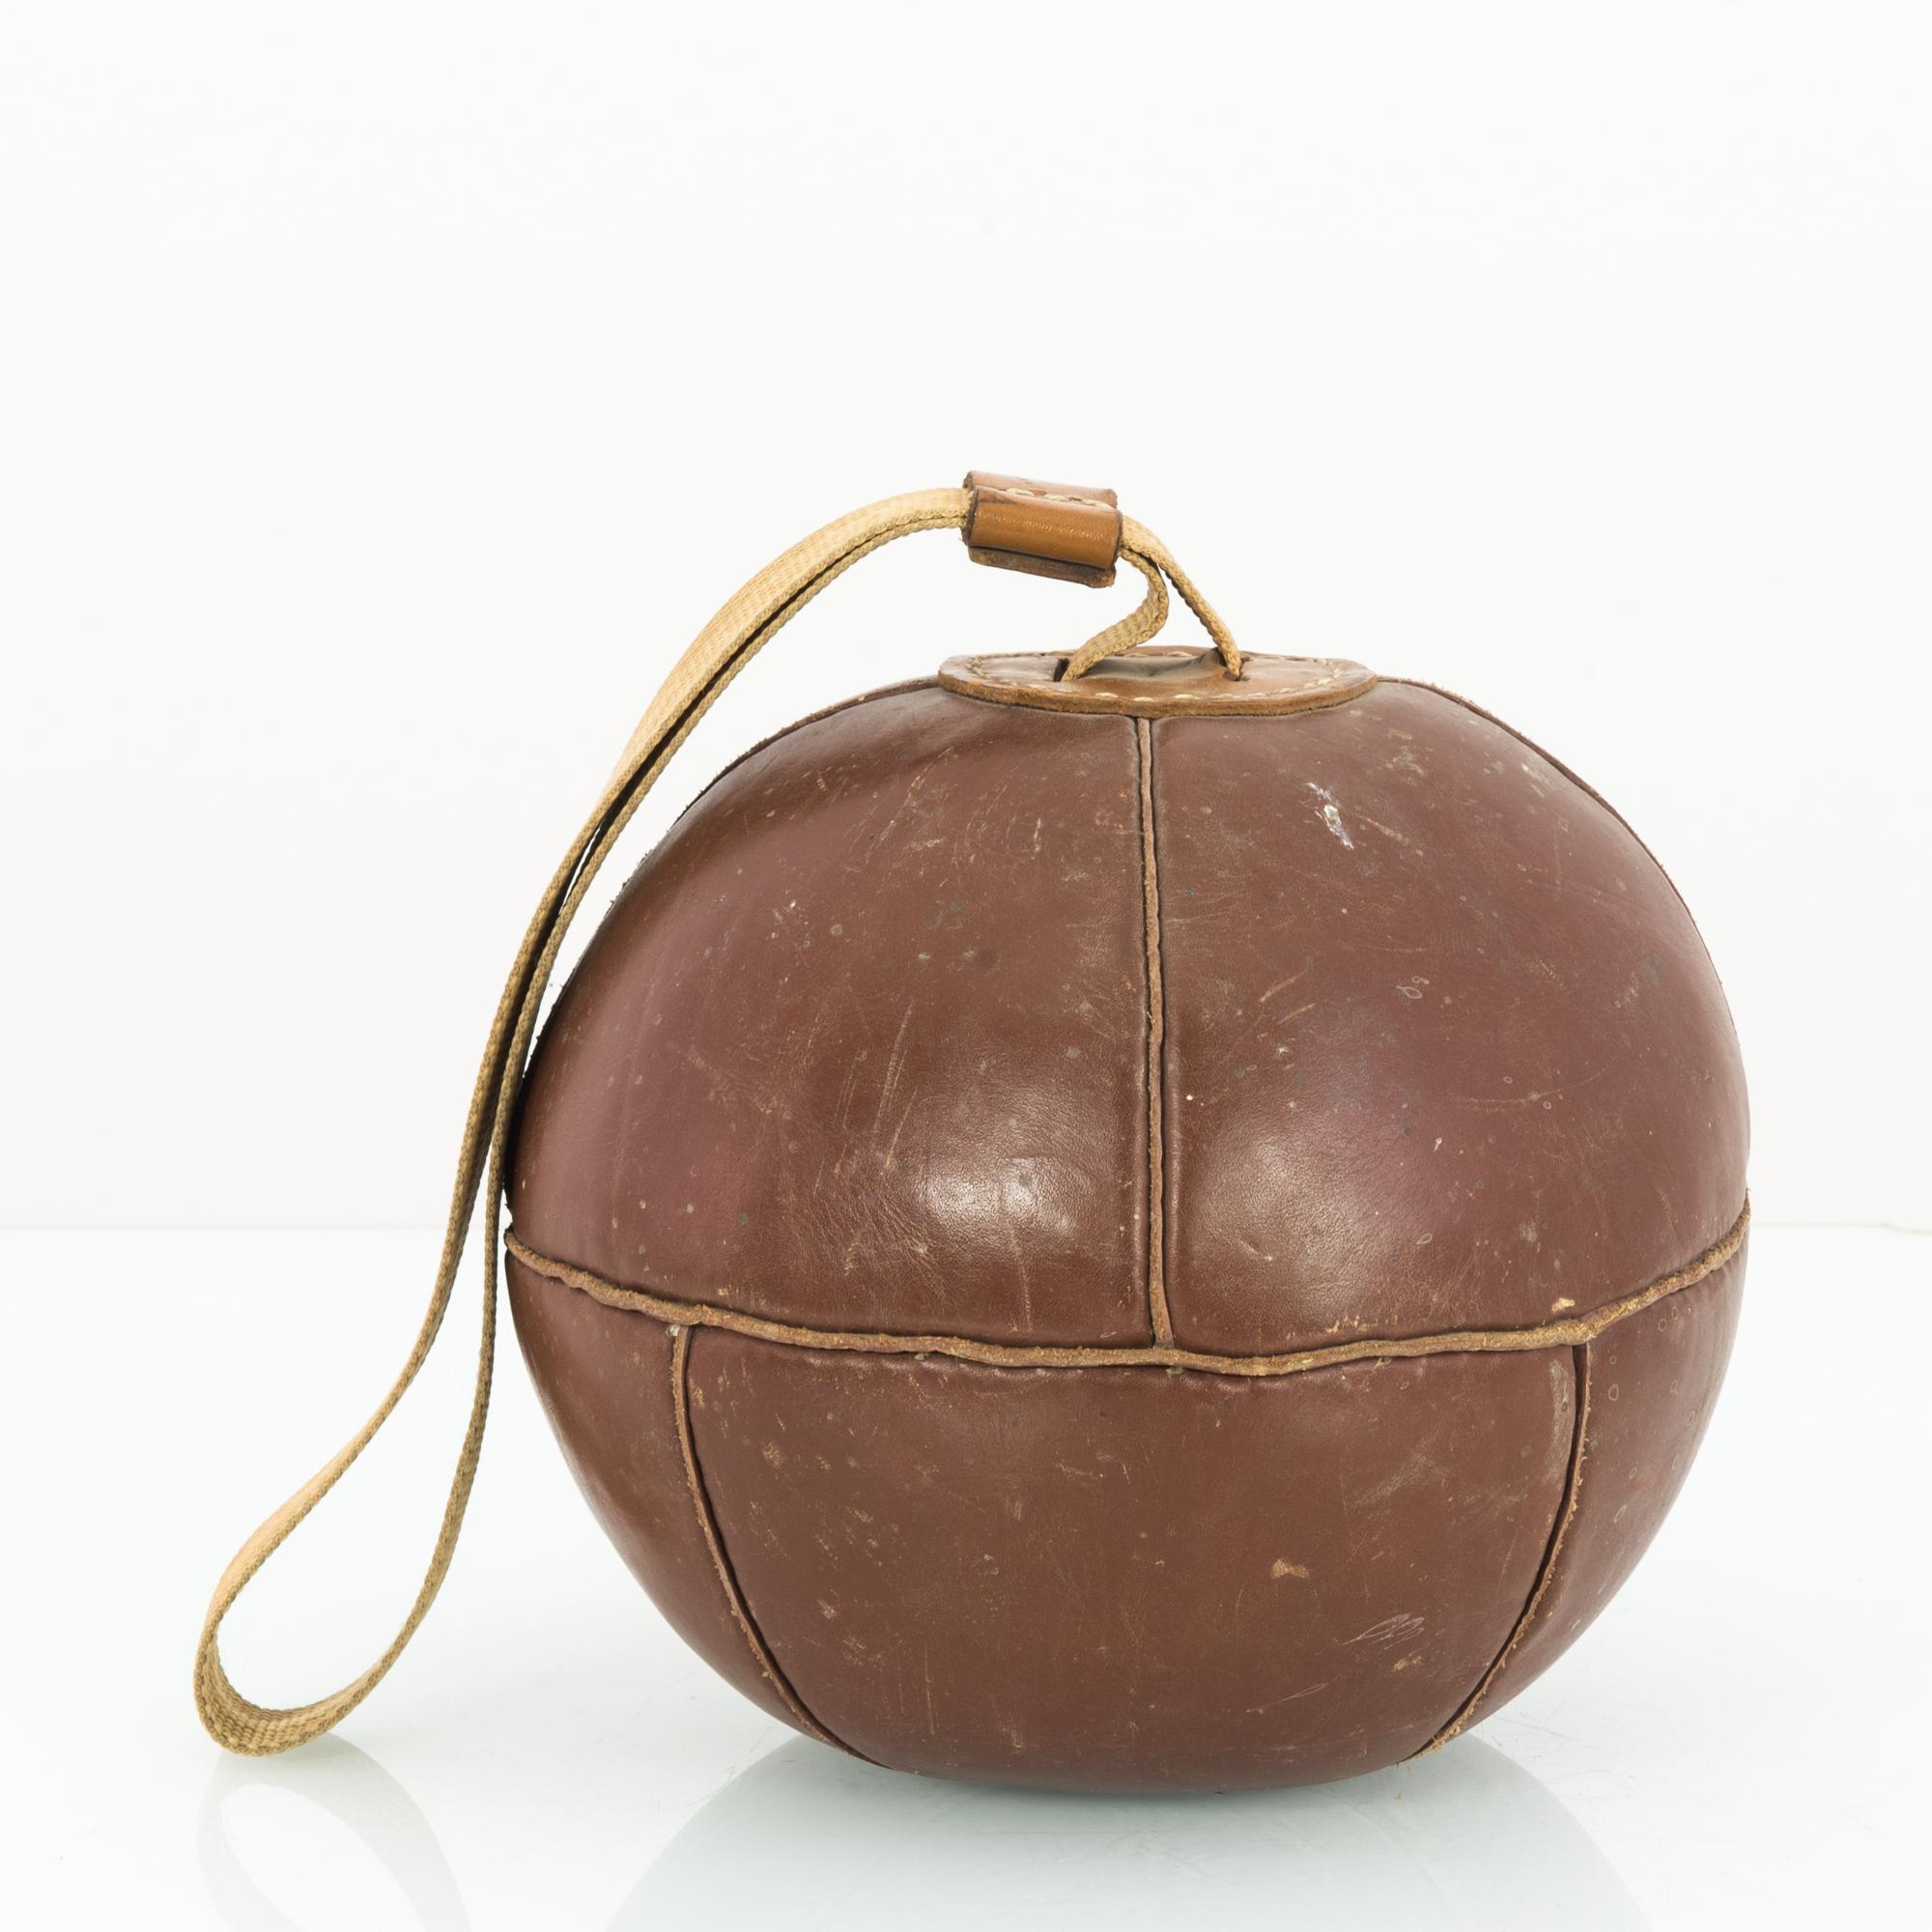 This boxing ball was made in the former Czechoslovakia, circa 1960. The ball can be suspended from a strap attached to the top. With its handcrafted panels displaying a timeworn patina, this piece will inject the spirit and intensity of boxing